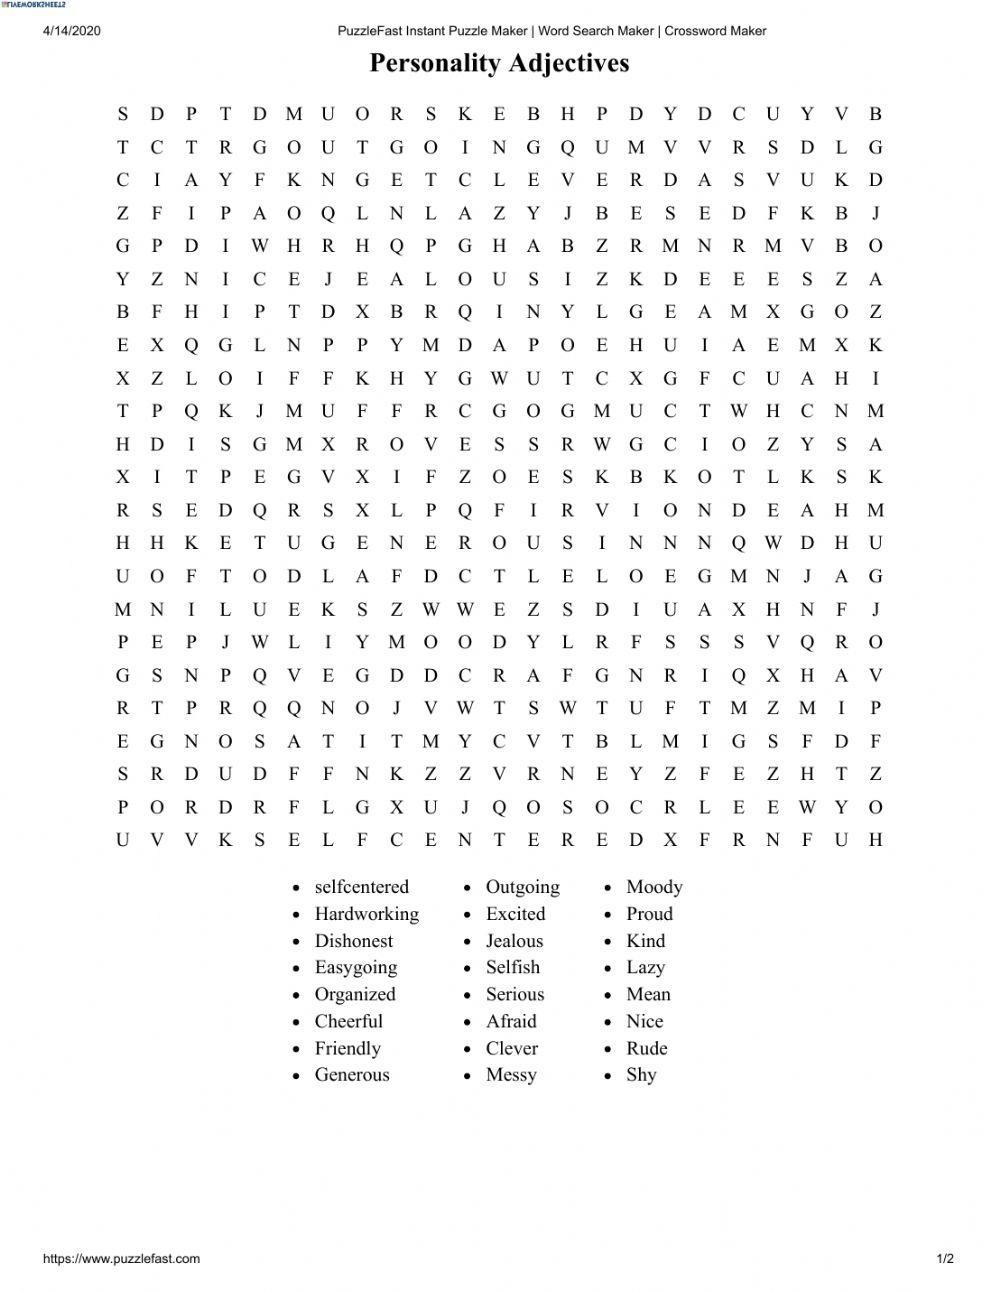 Personality Adjectives Word search Puzzle